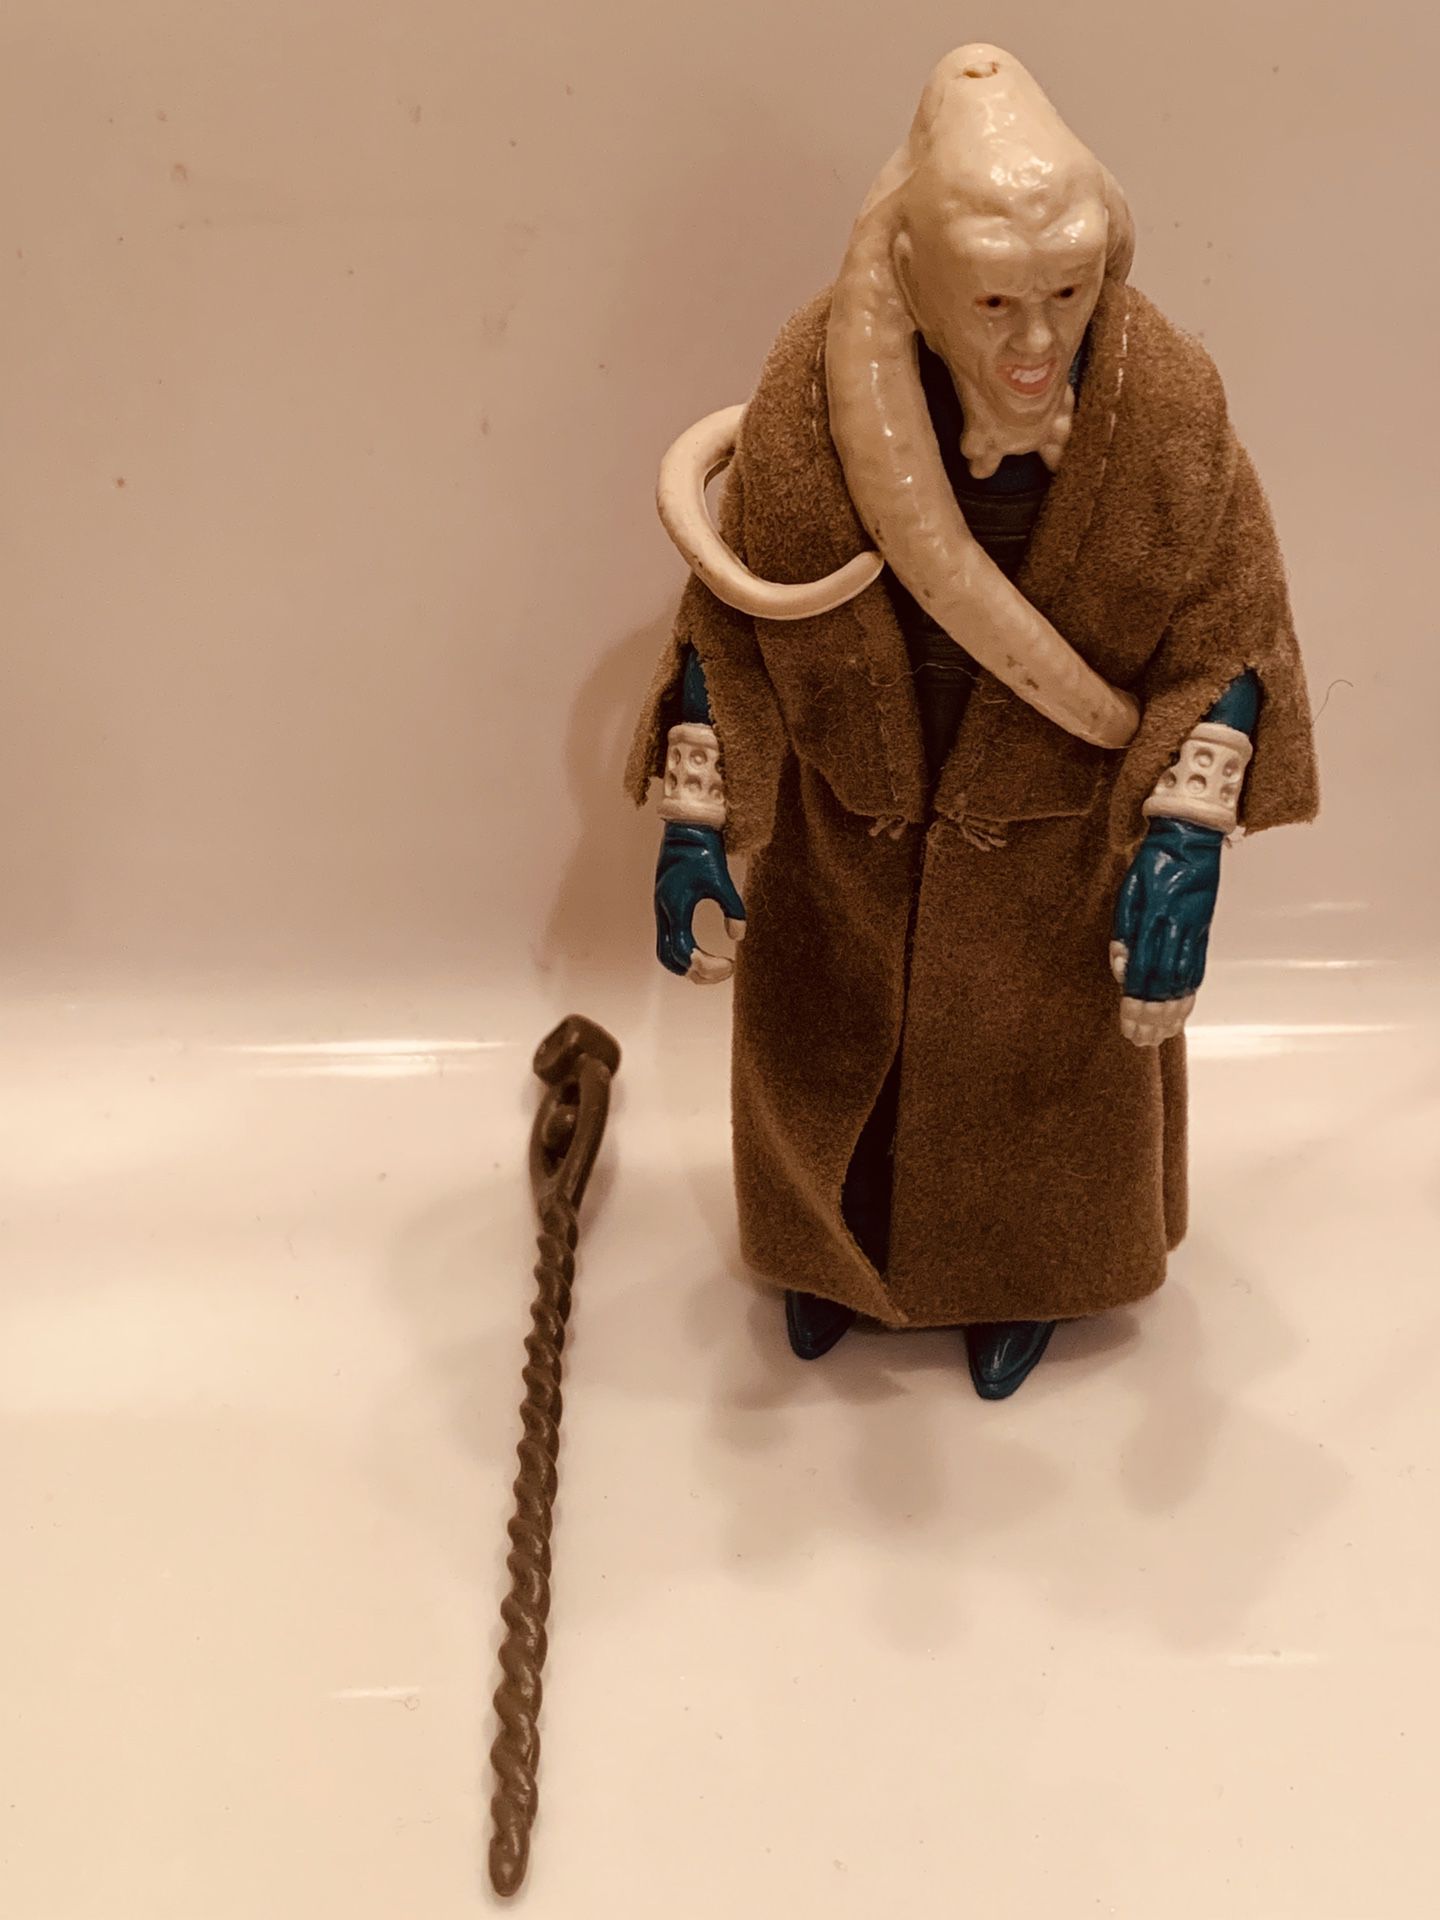 1983 Vintage Star Wars Bib Fortuna Action Figure Complete With Weapon Cloak